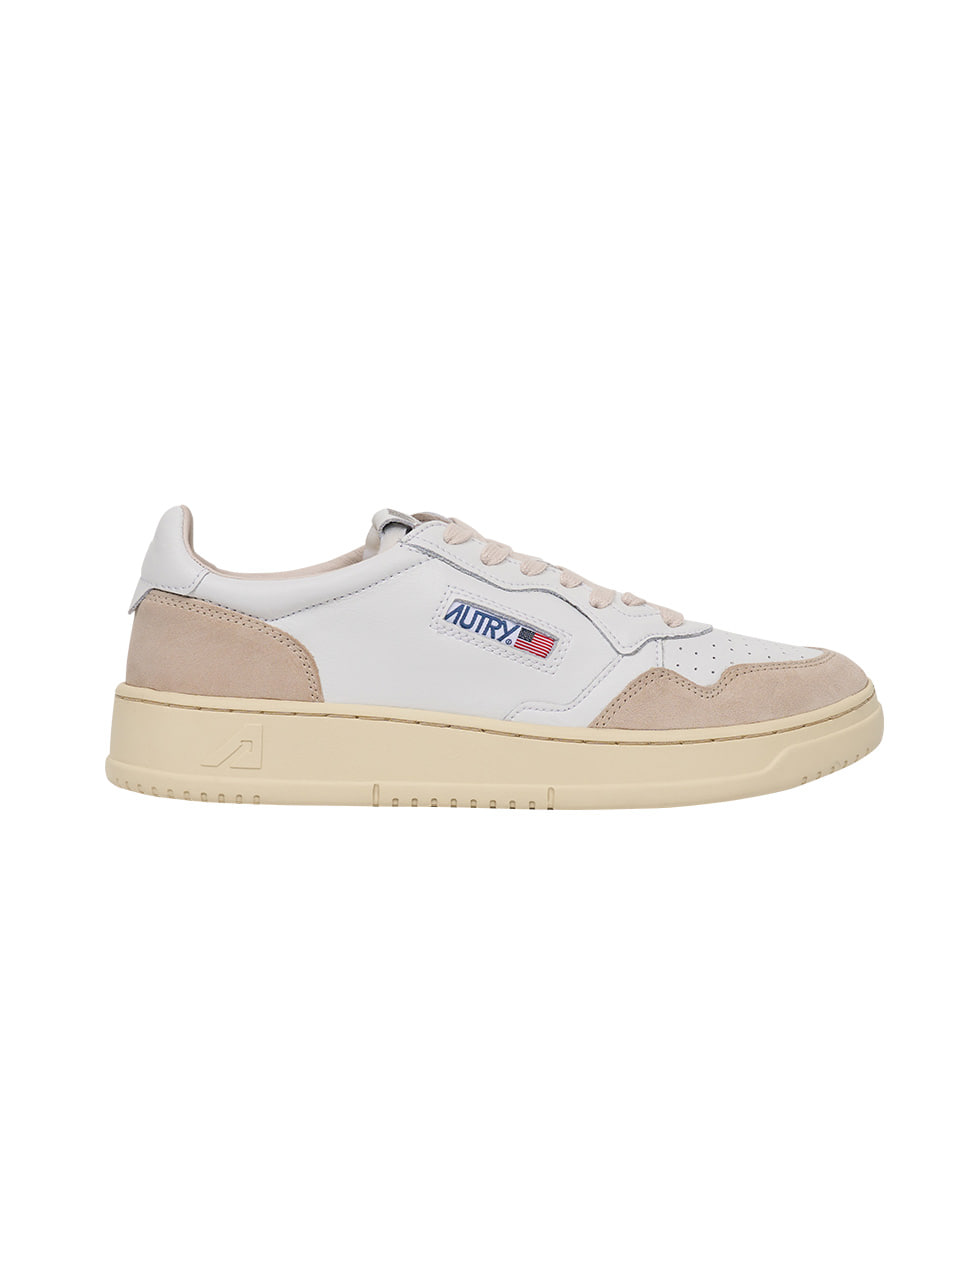 AUTRY - MEDALIST SUEDE LEATHER SNEAKERS (WHITE/SUEDE)